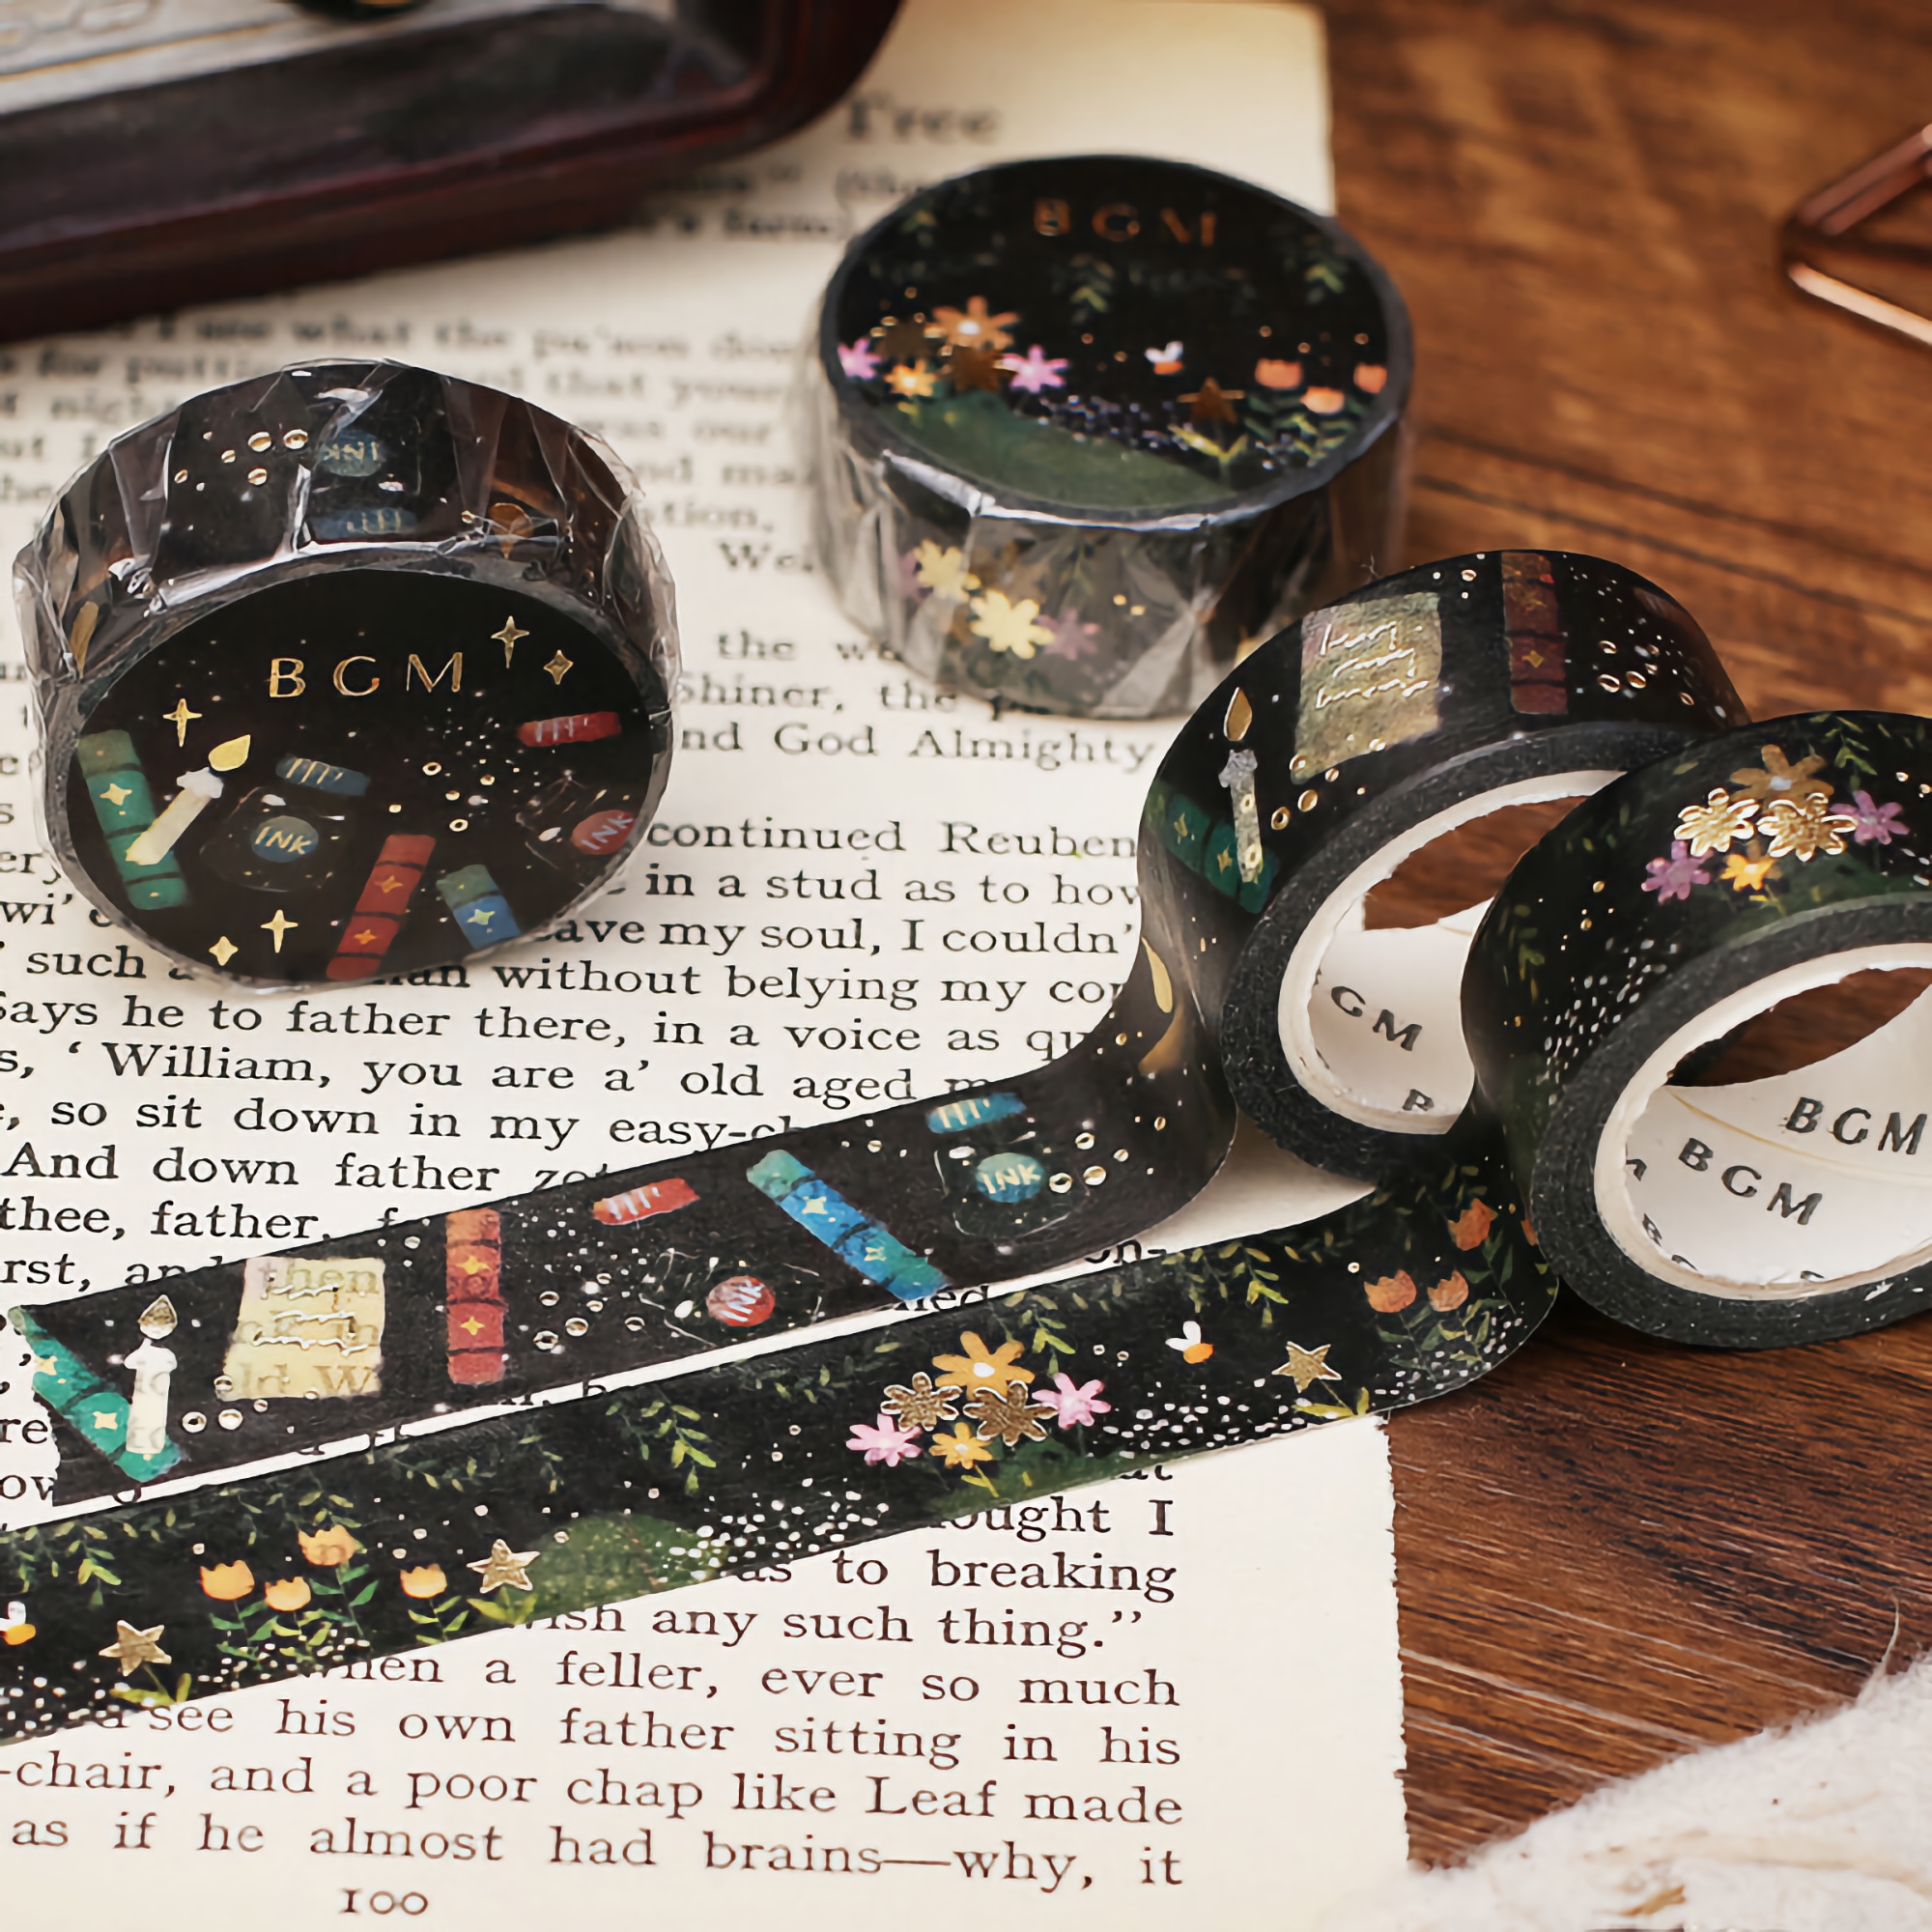 BGM Washi Tape Special Foil Firefly Forest 15 mm